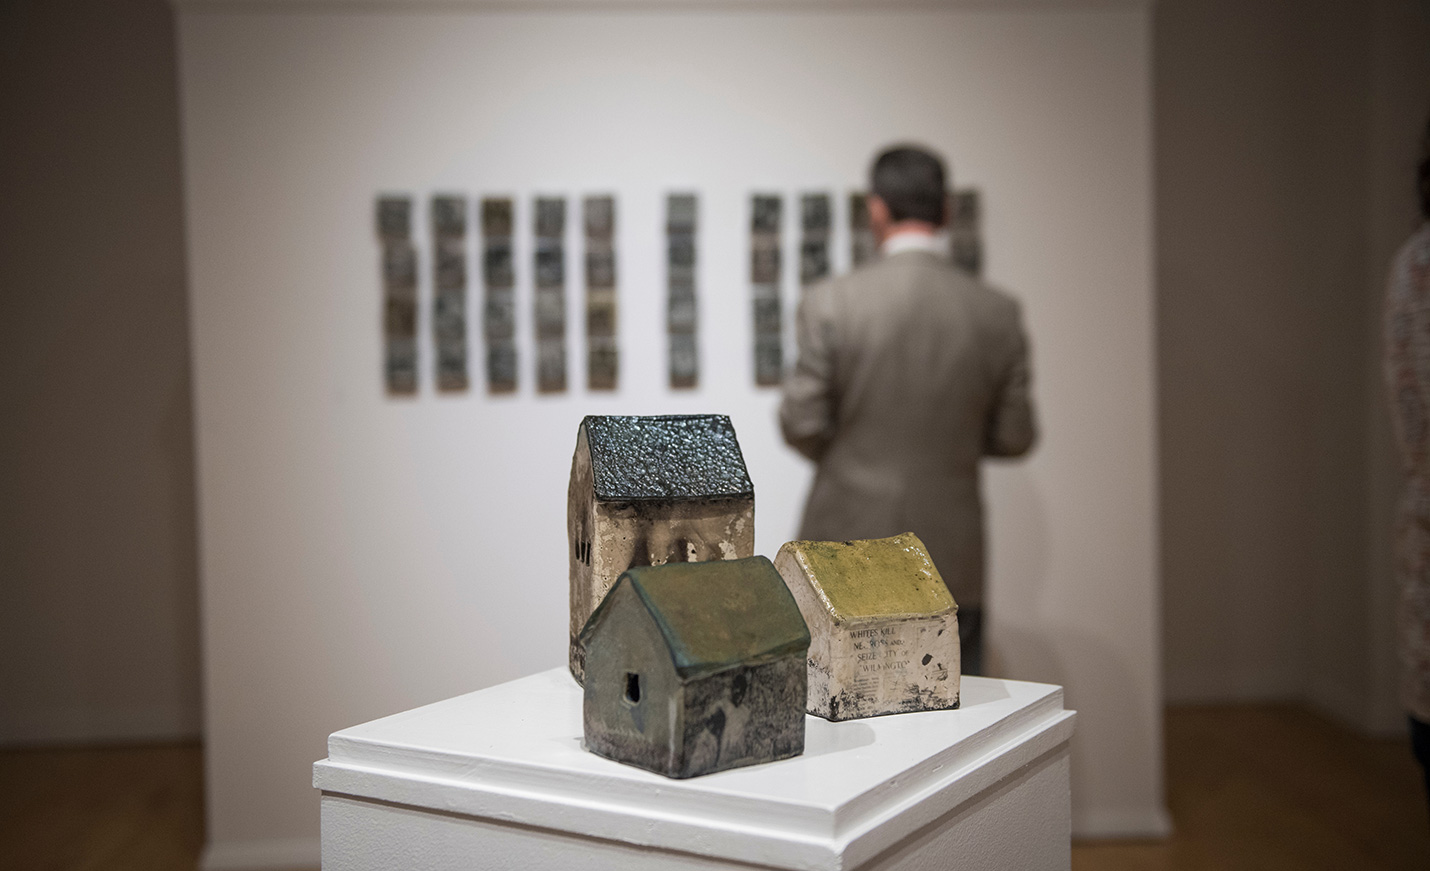 Three ceramic houses sit on a display table inside an art gallery